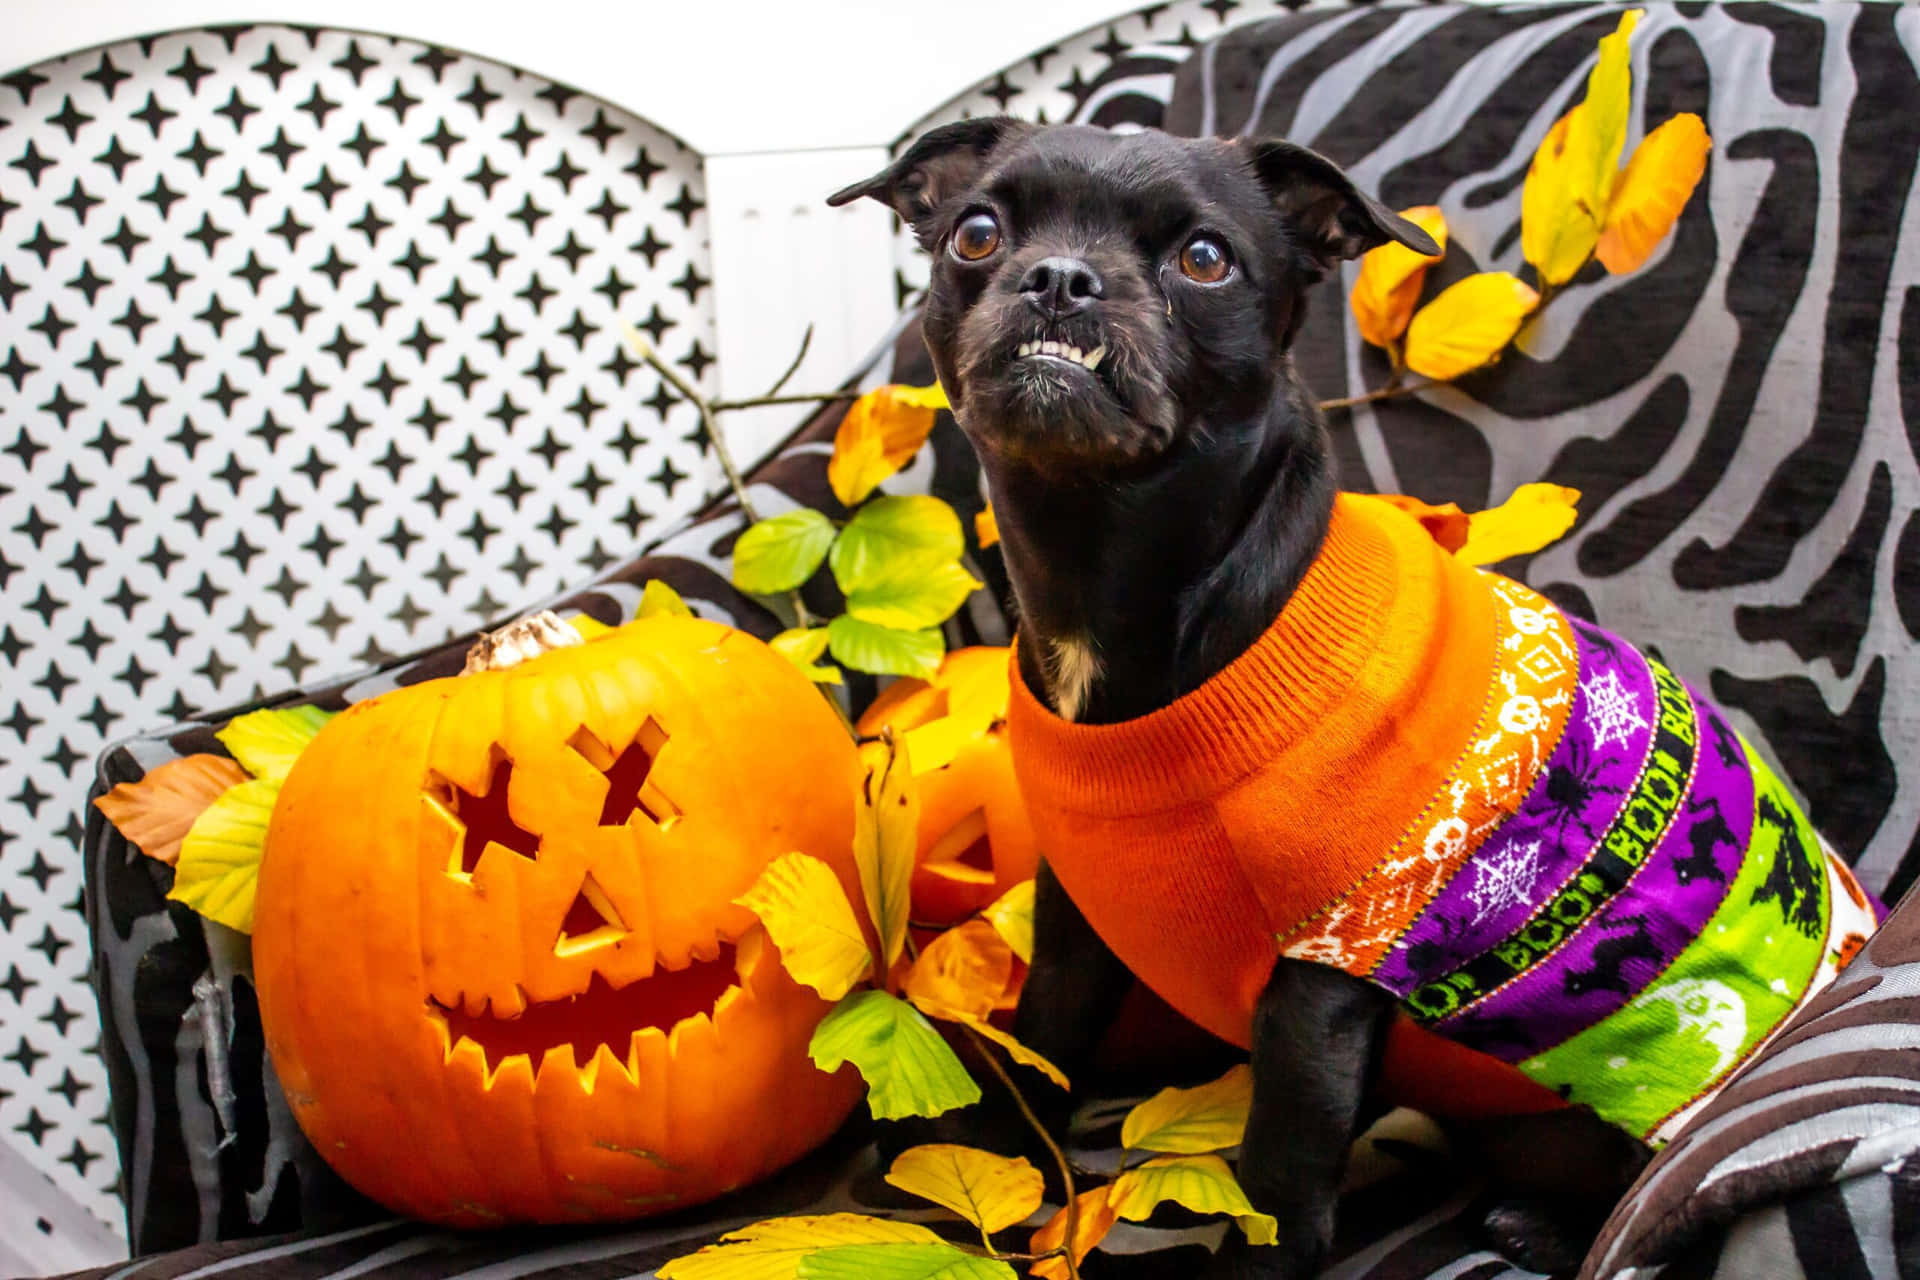 Dress your pets up in these spooky Halloween costumes! Wallpaper